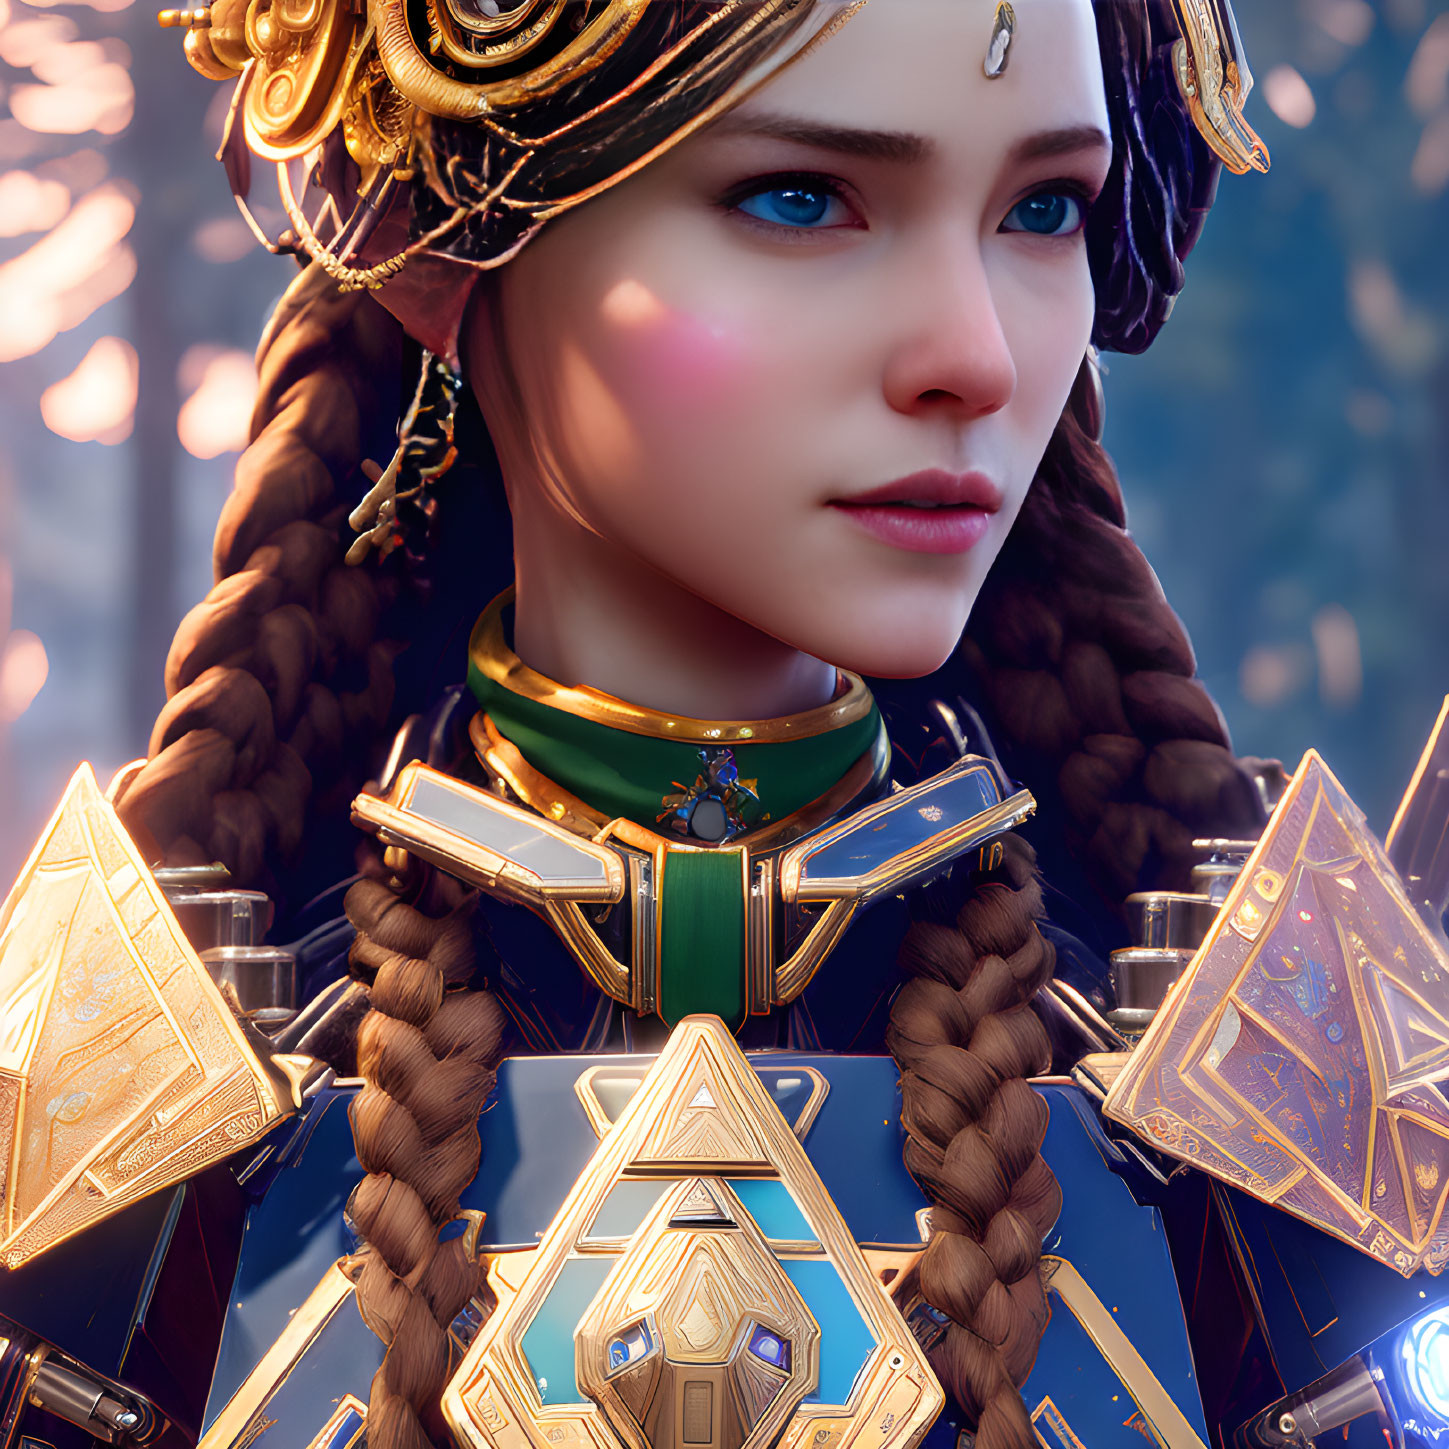 Intricate gold headgear on woman with braided hair and detailed armor